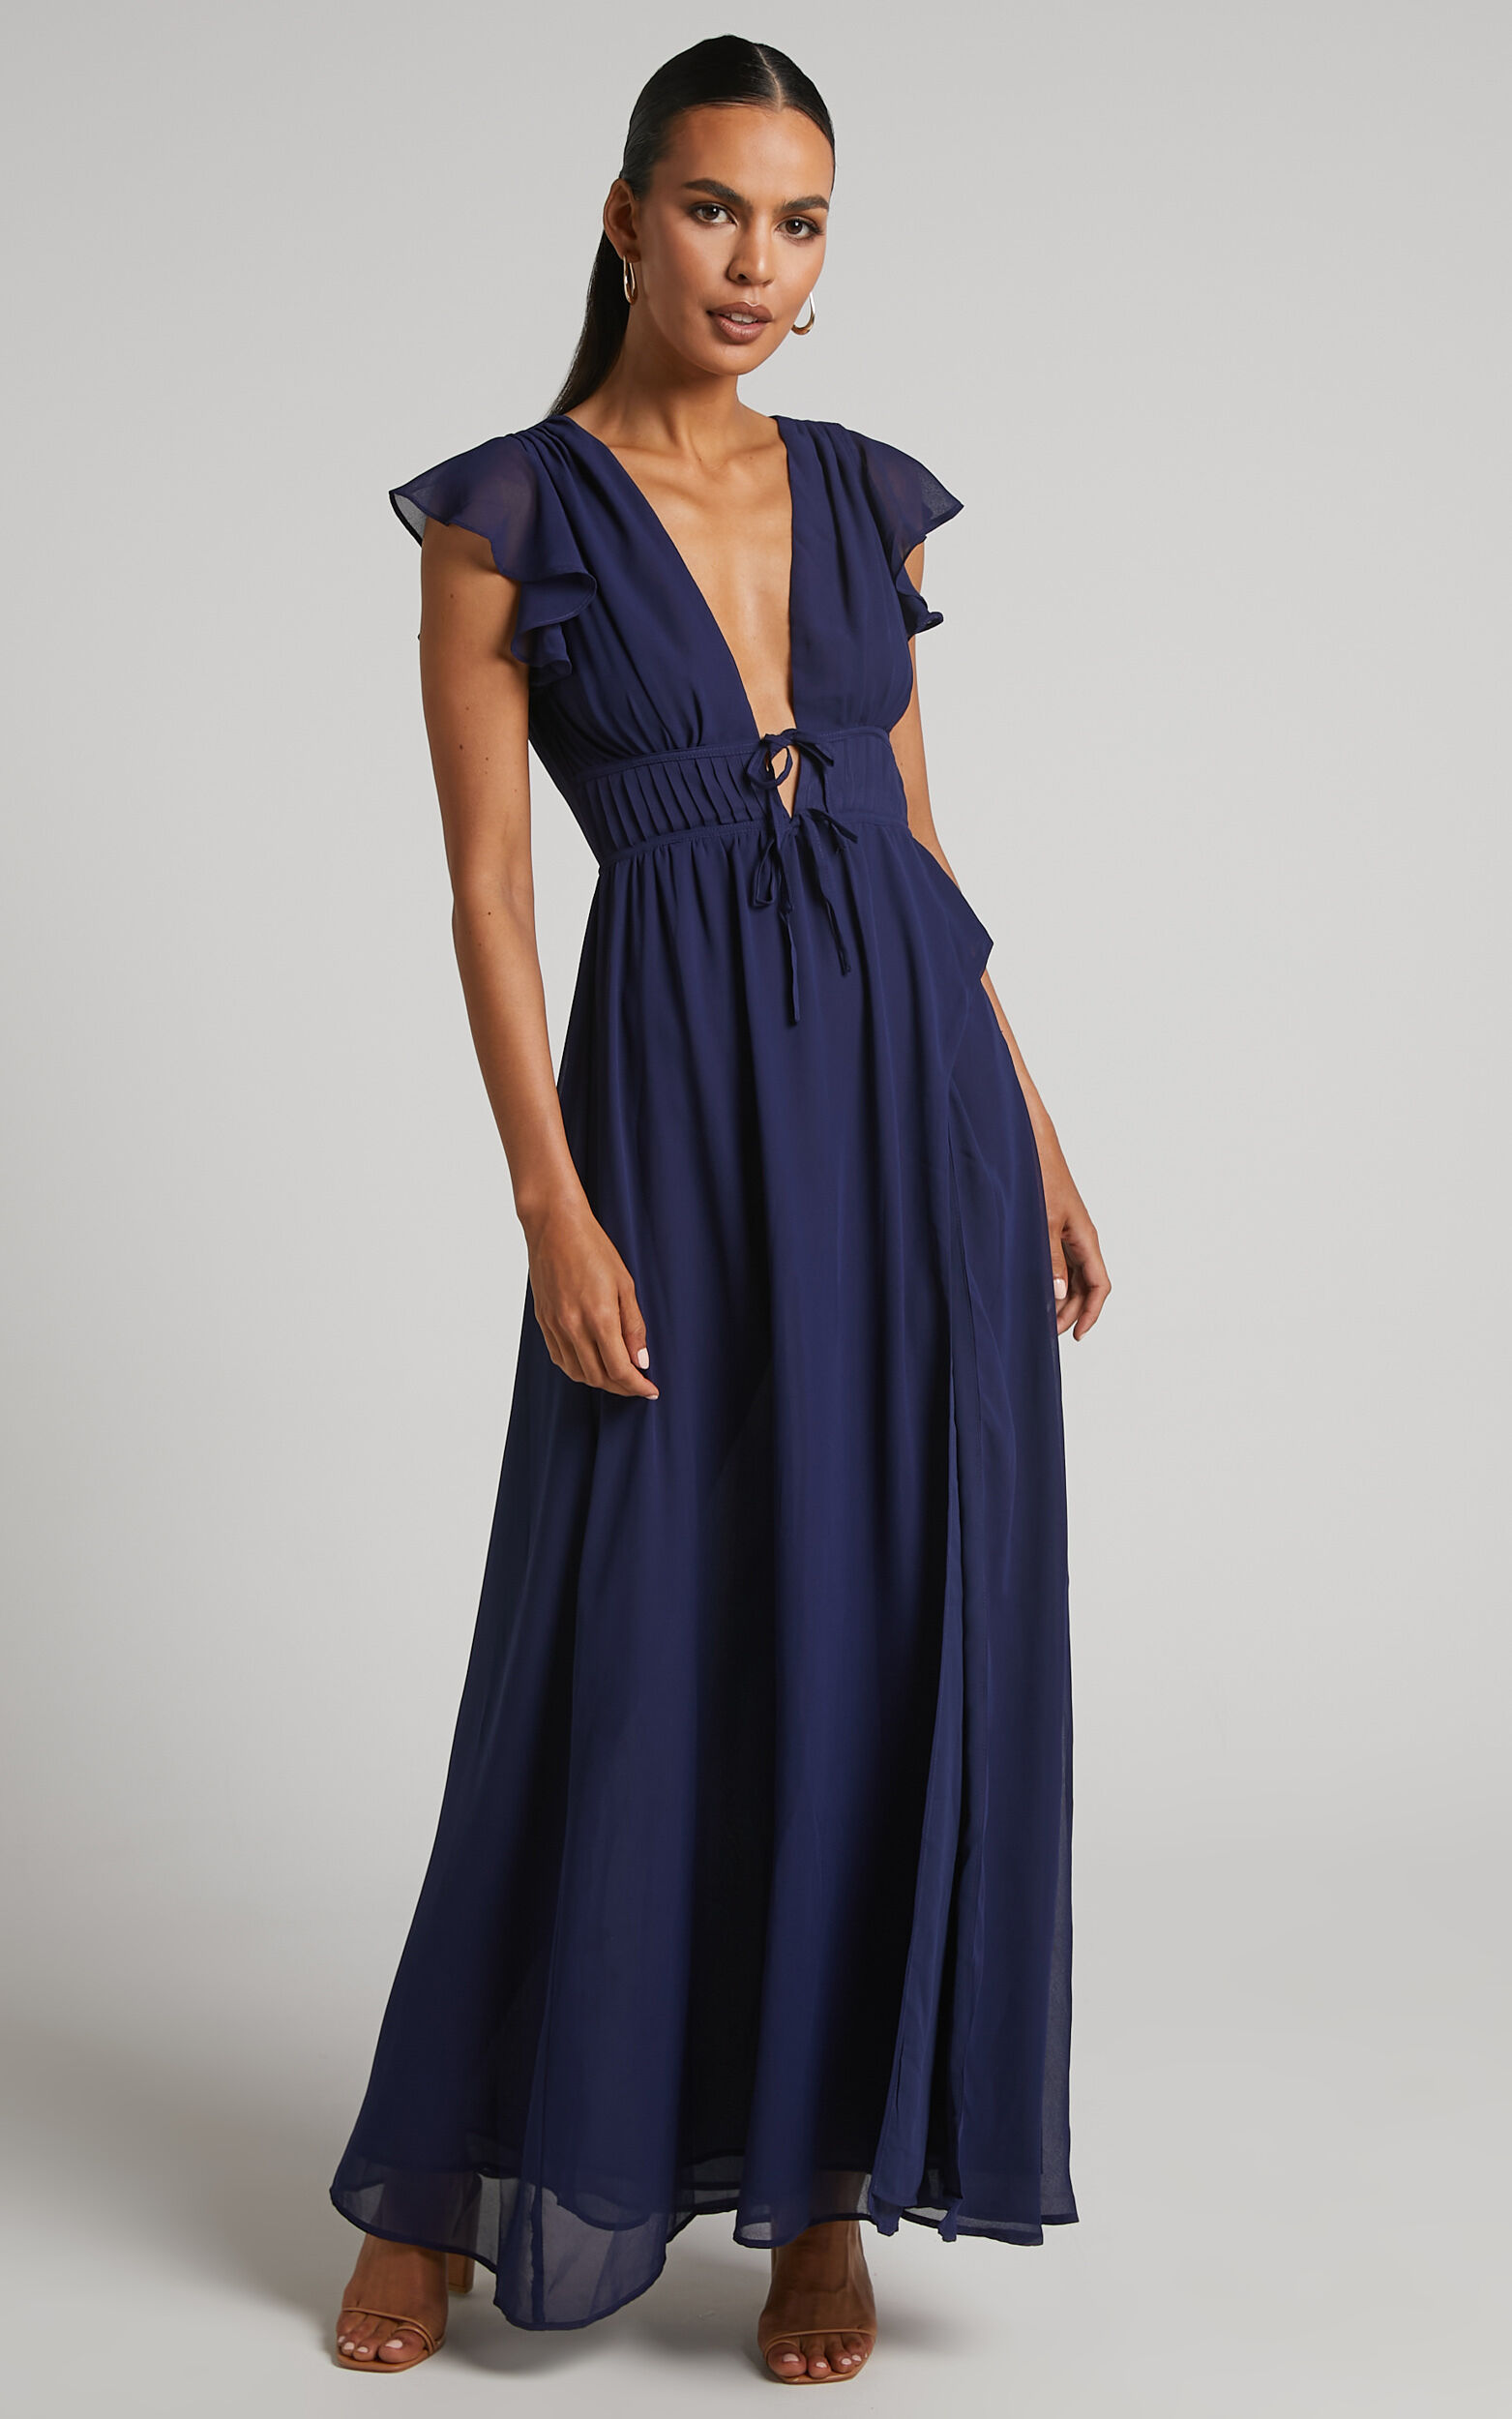 Alextera Maxi Dress - Tie Front Frill Sleeve Plunge High Split Dress in Navy - 04, NVY1, super-hi-res image number null